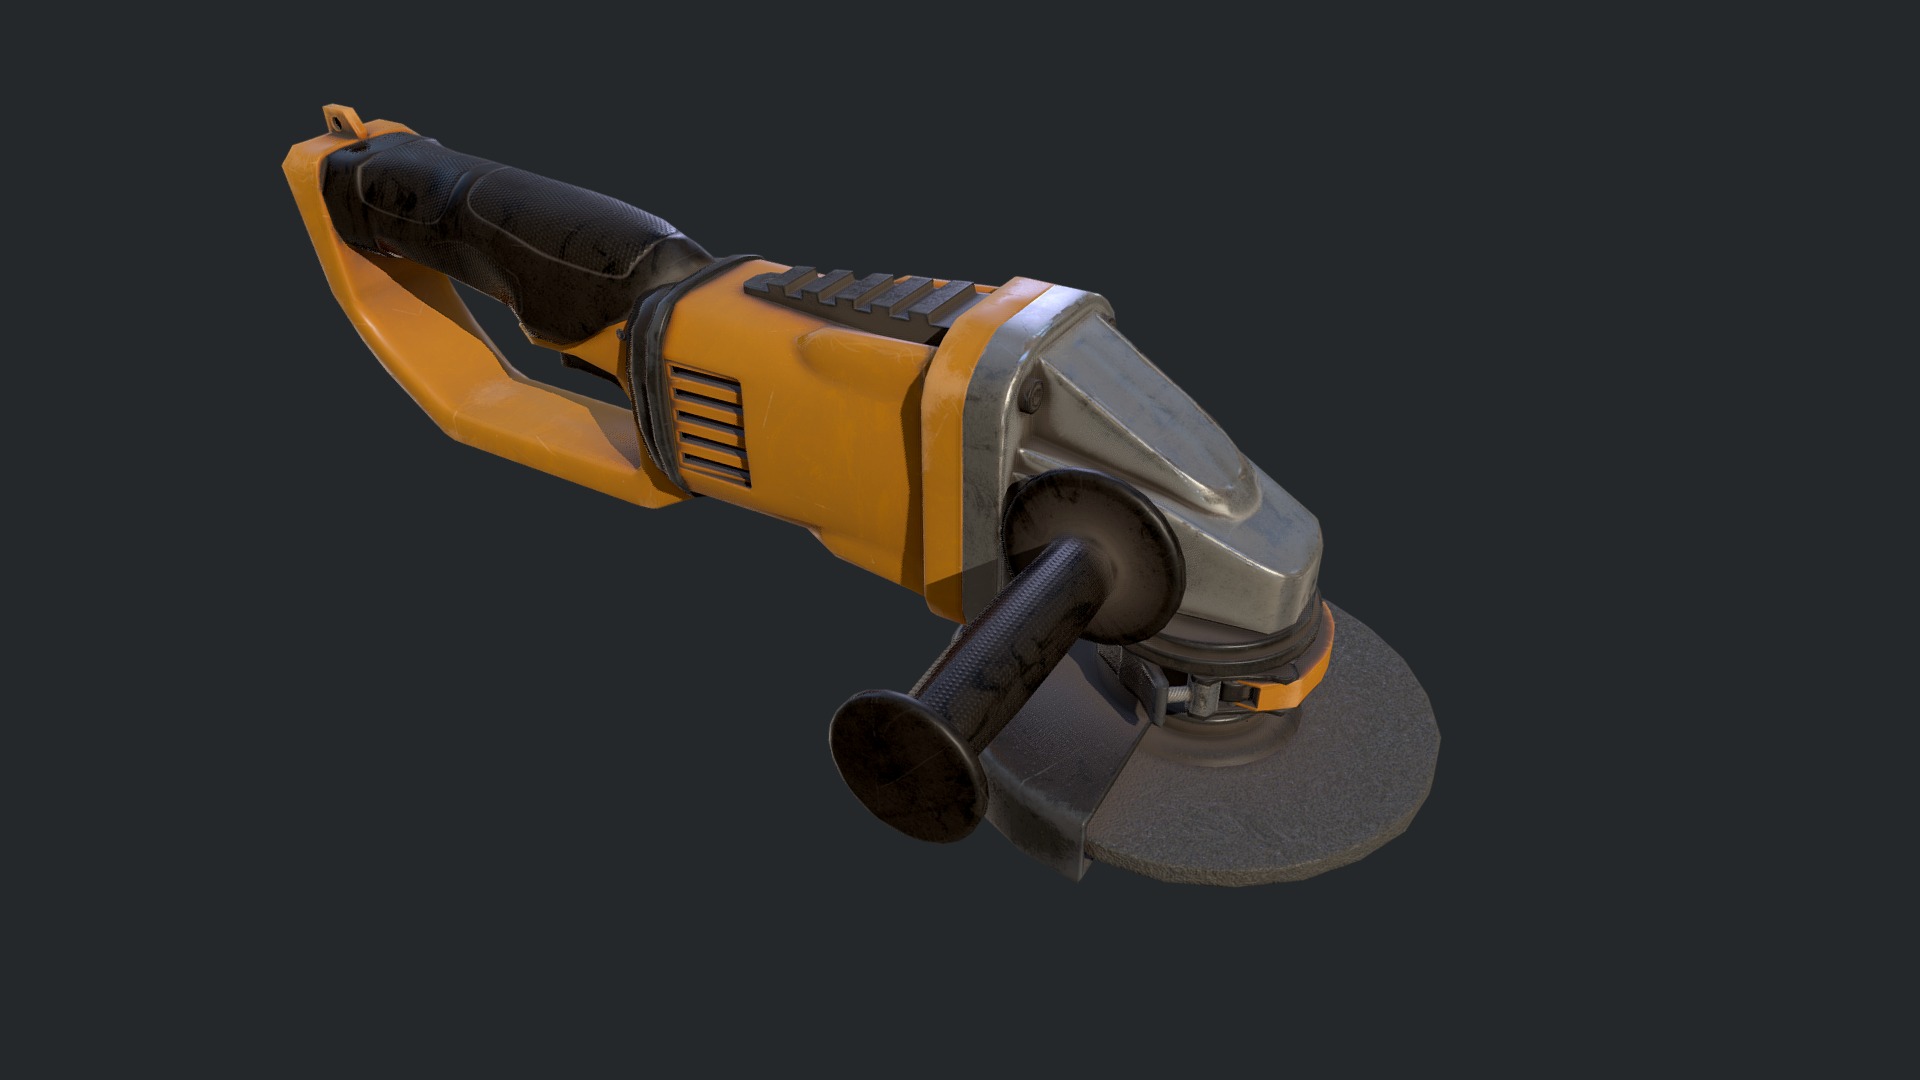 3D model Angle Grinder no brand - This is a 3D model of the Angle Grinder no brand. The 3D model is about a yellow and black drill.